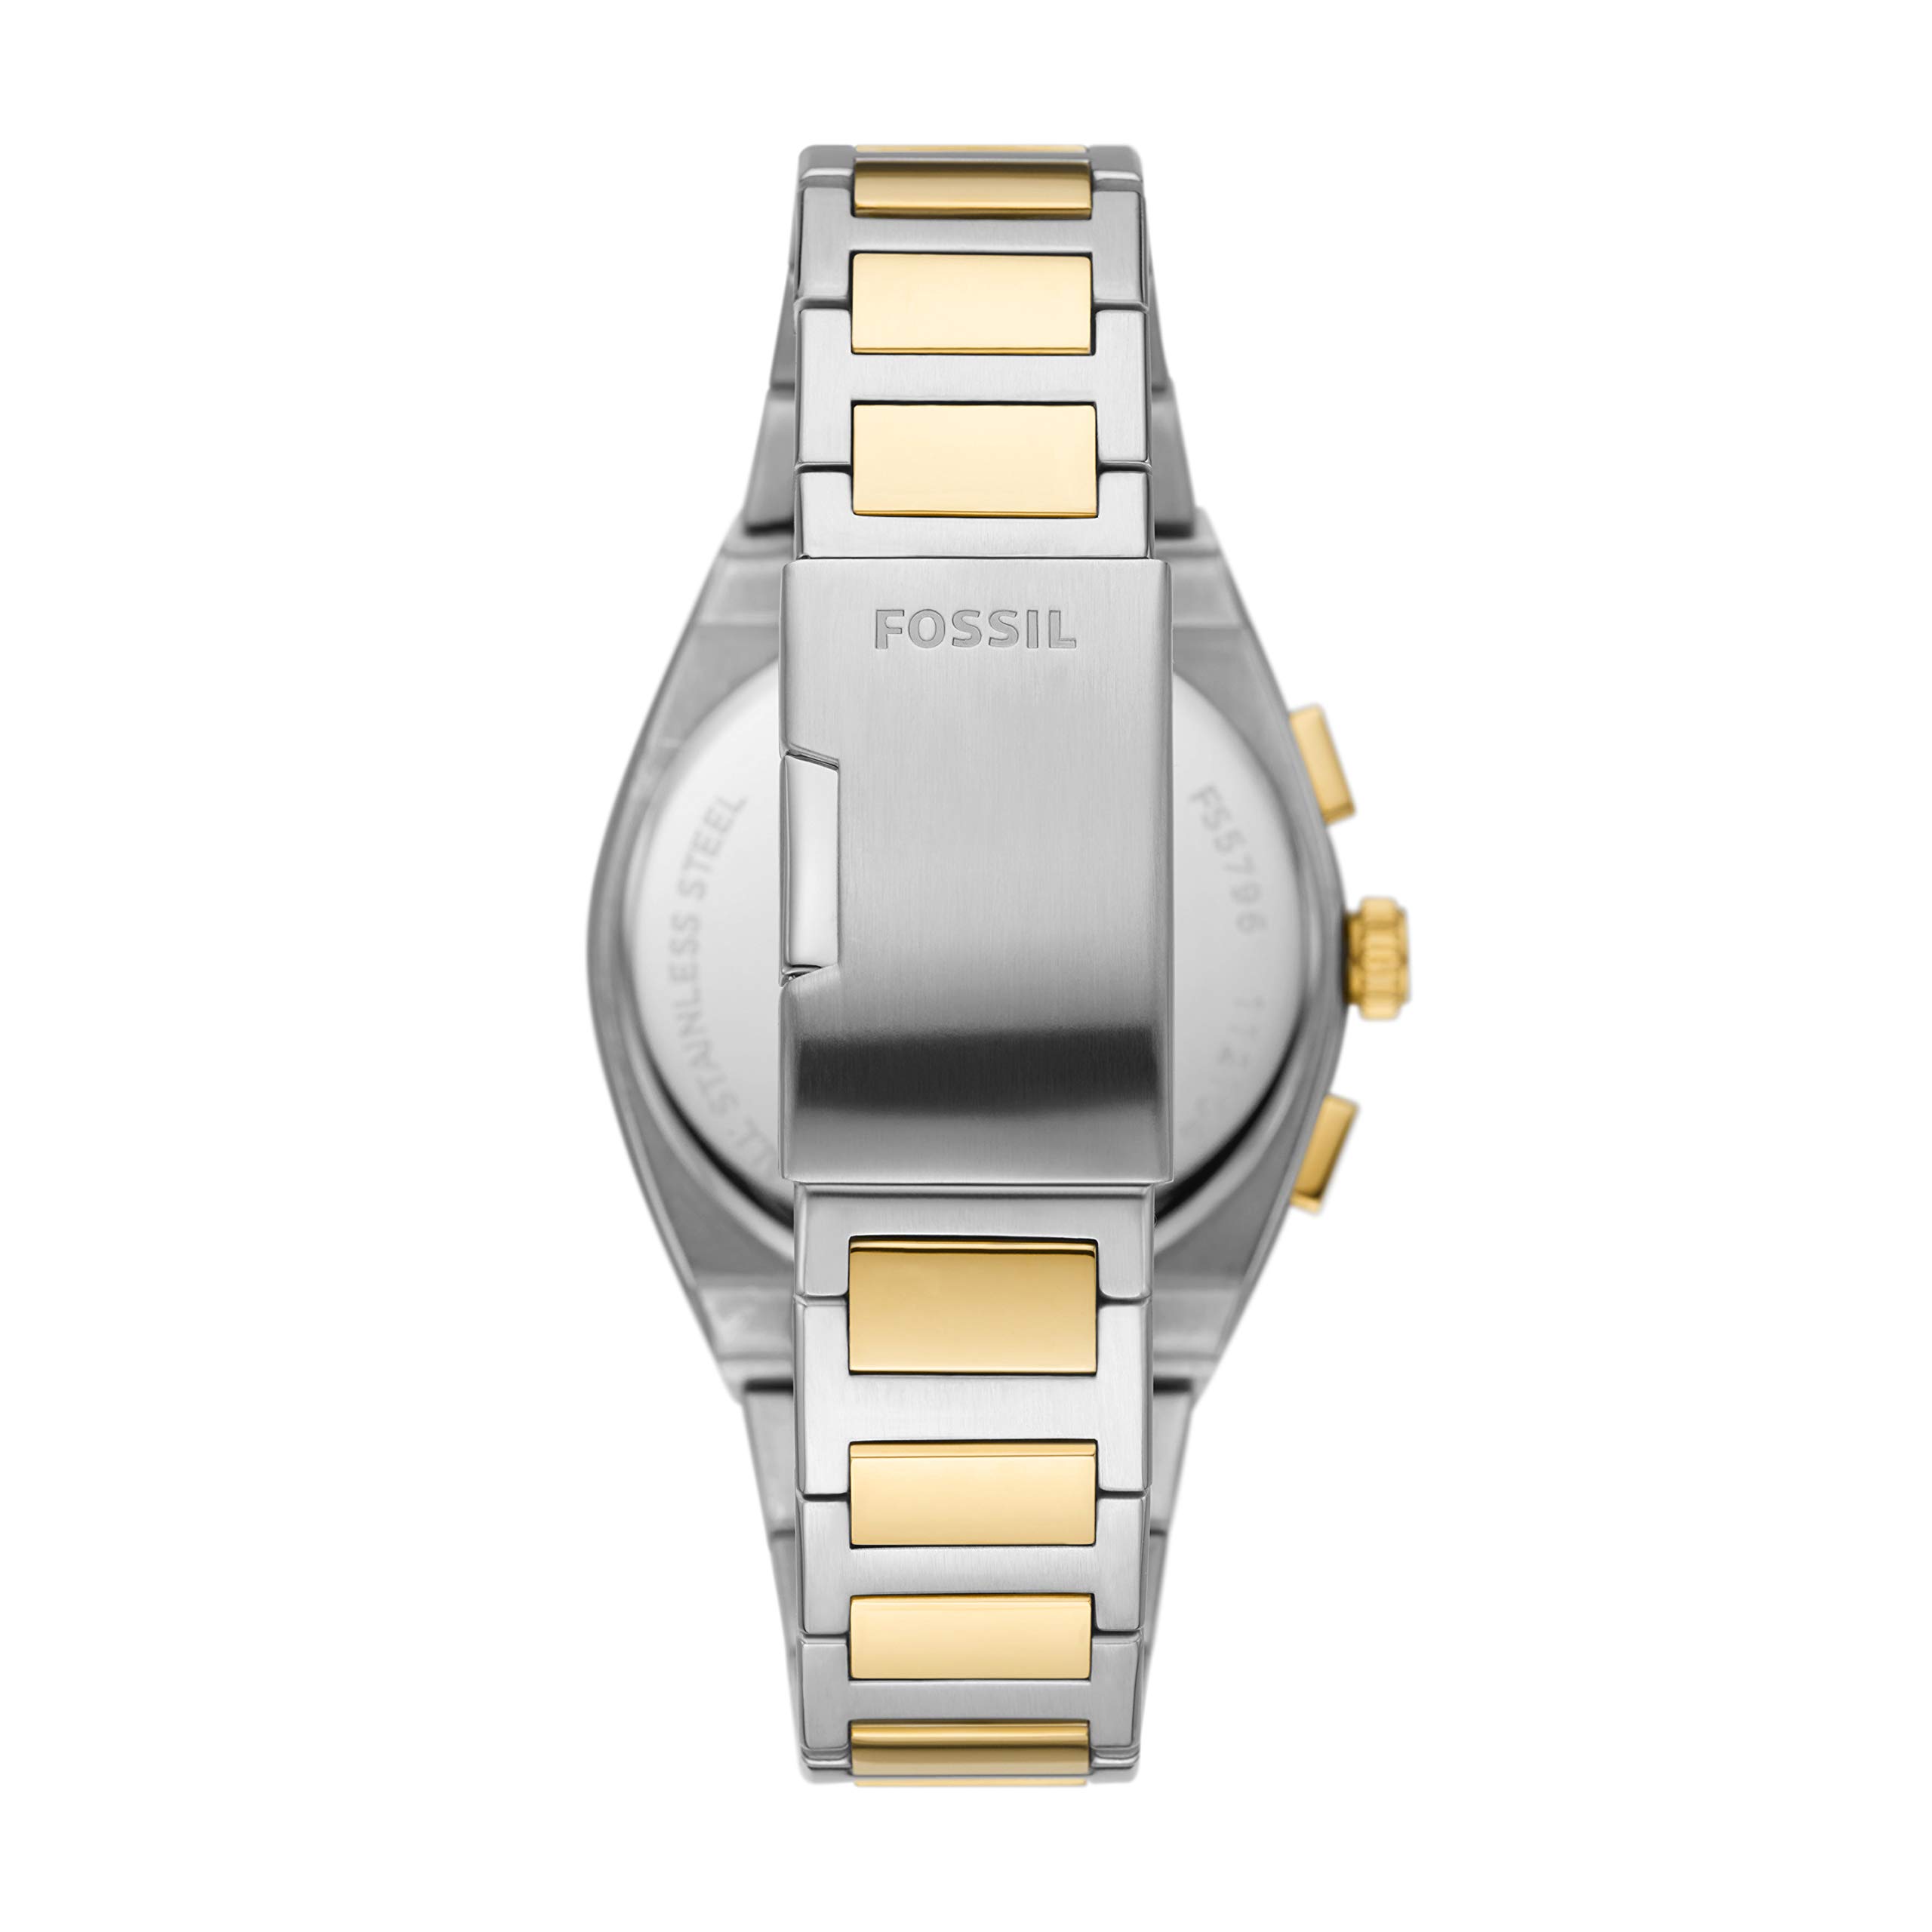 Fossil Everett Men's Watch with Stainless Steel or Leather Band